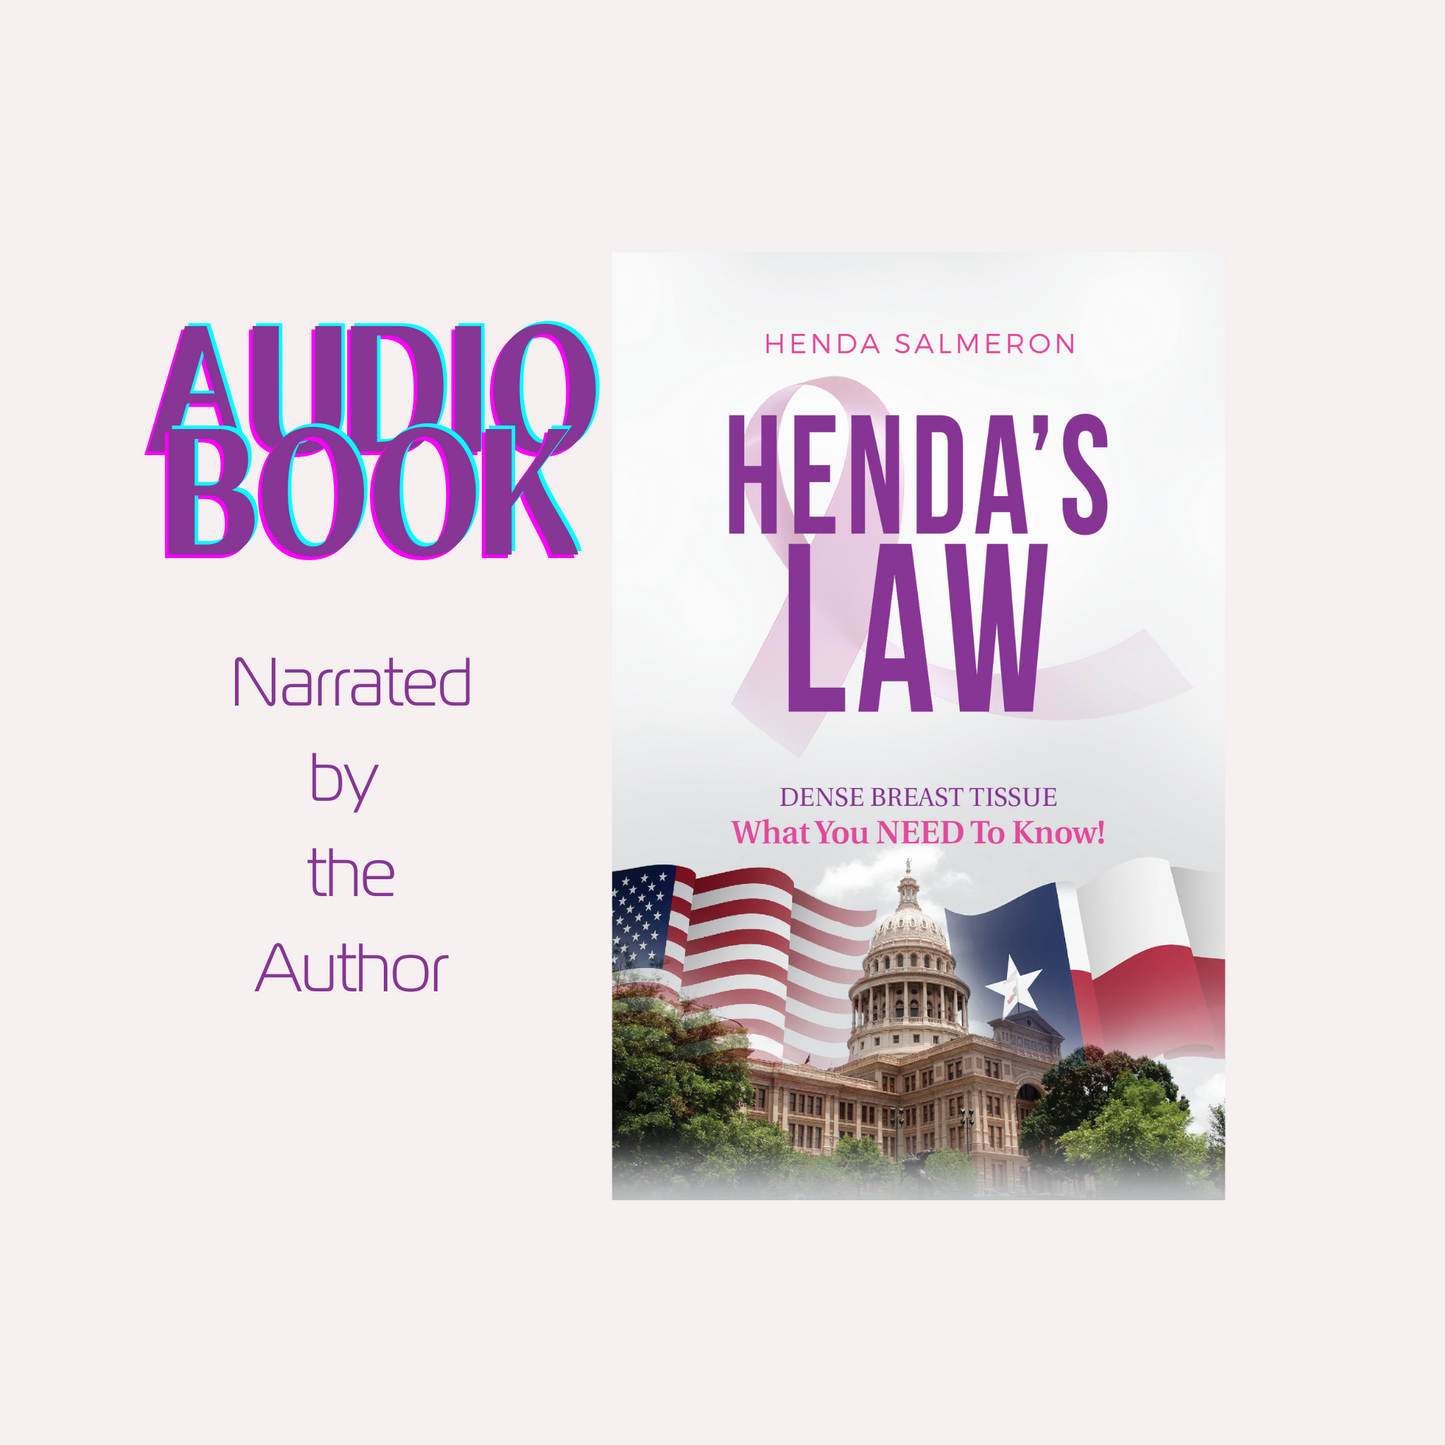 Audiobook: Henda's Law: Dense Breast Tissue: What You Need to Know